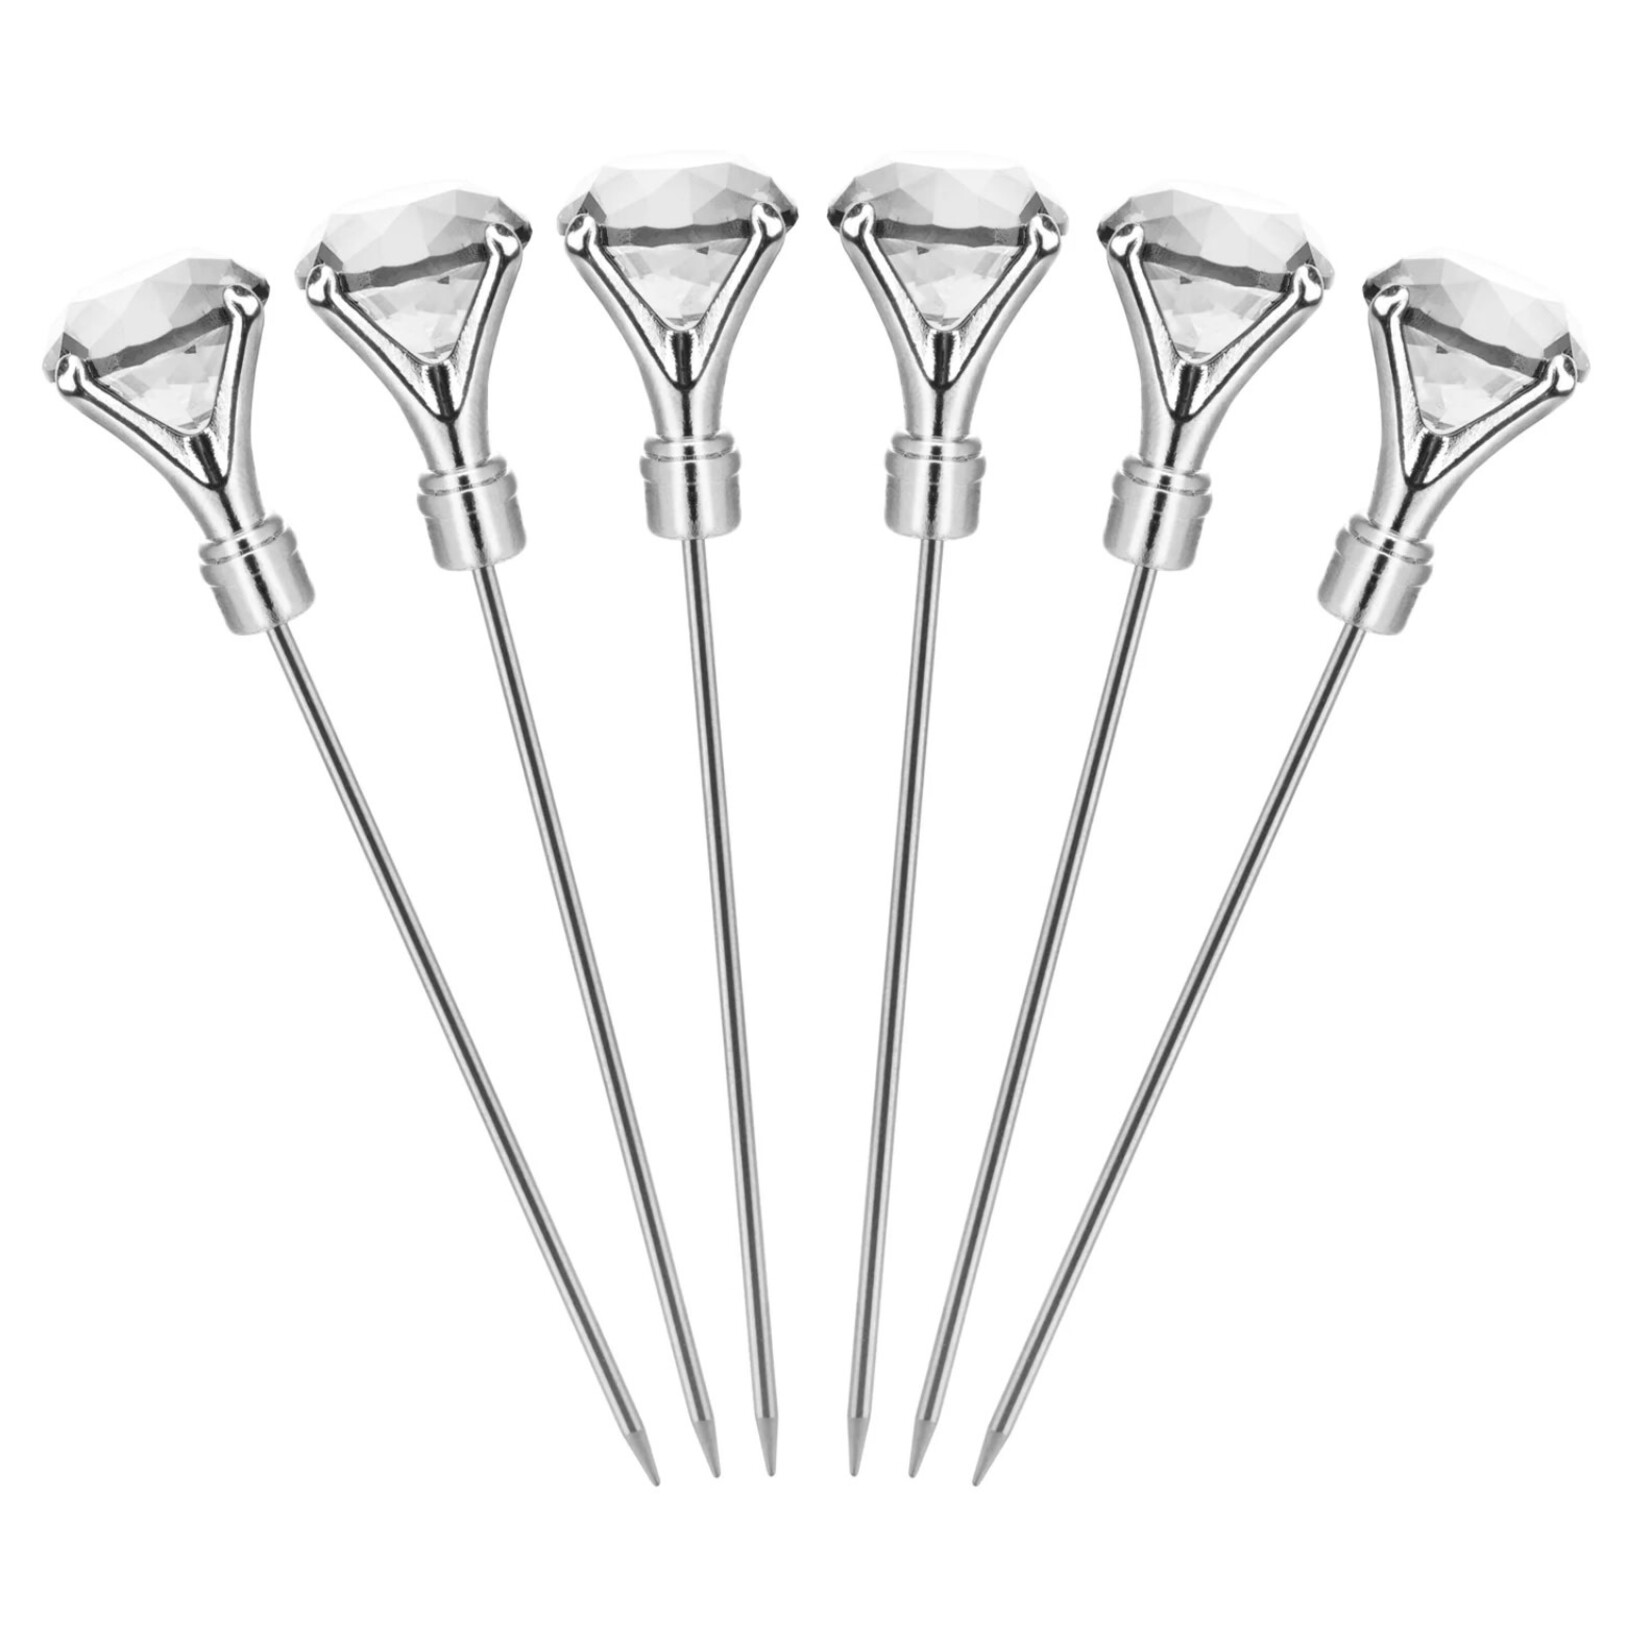 FINAL TOUCH FINAL TOUCH Diamond Cocktail Picks S/6 - Clear